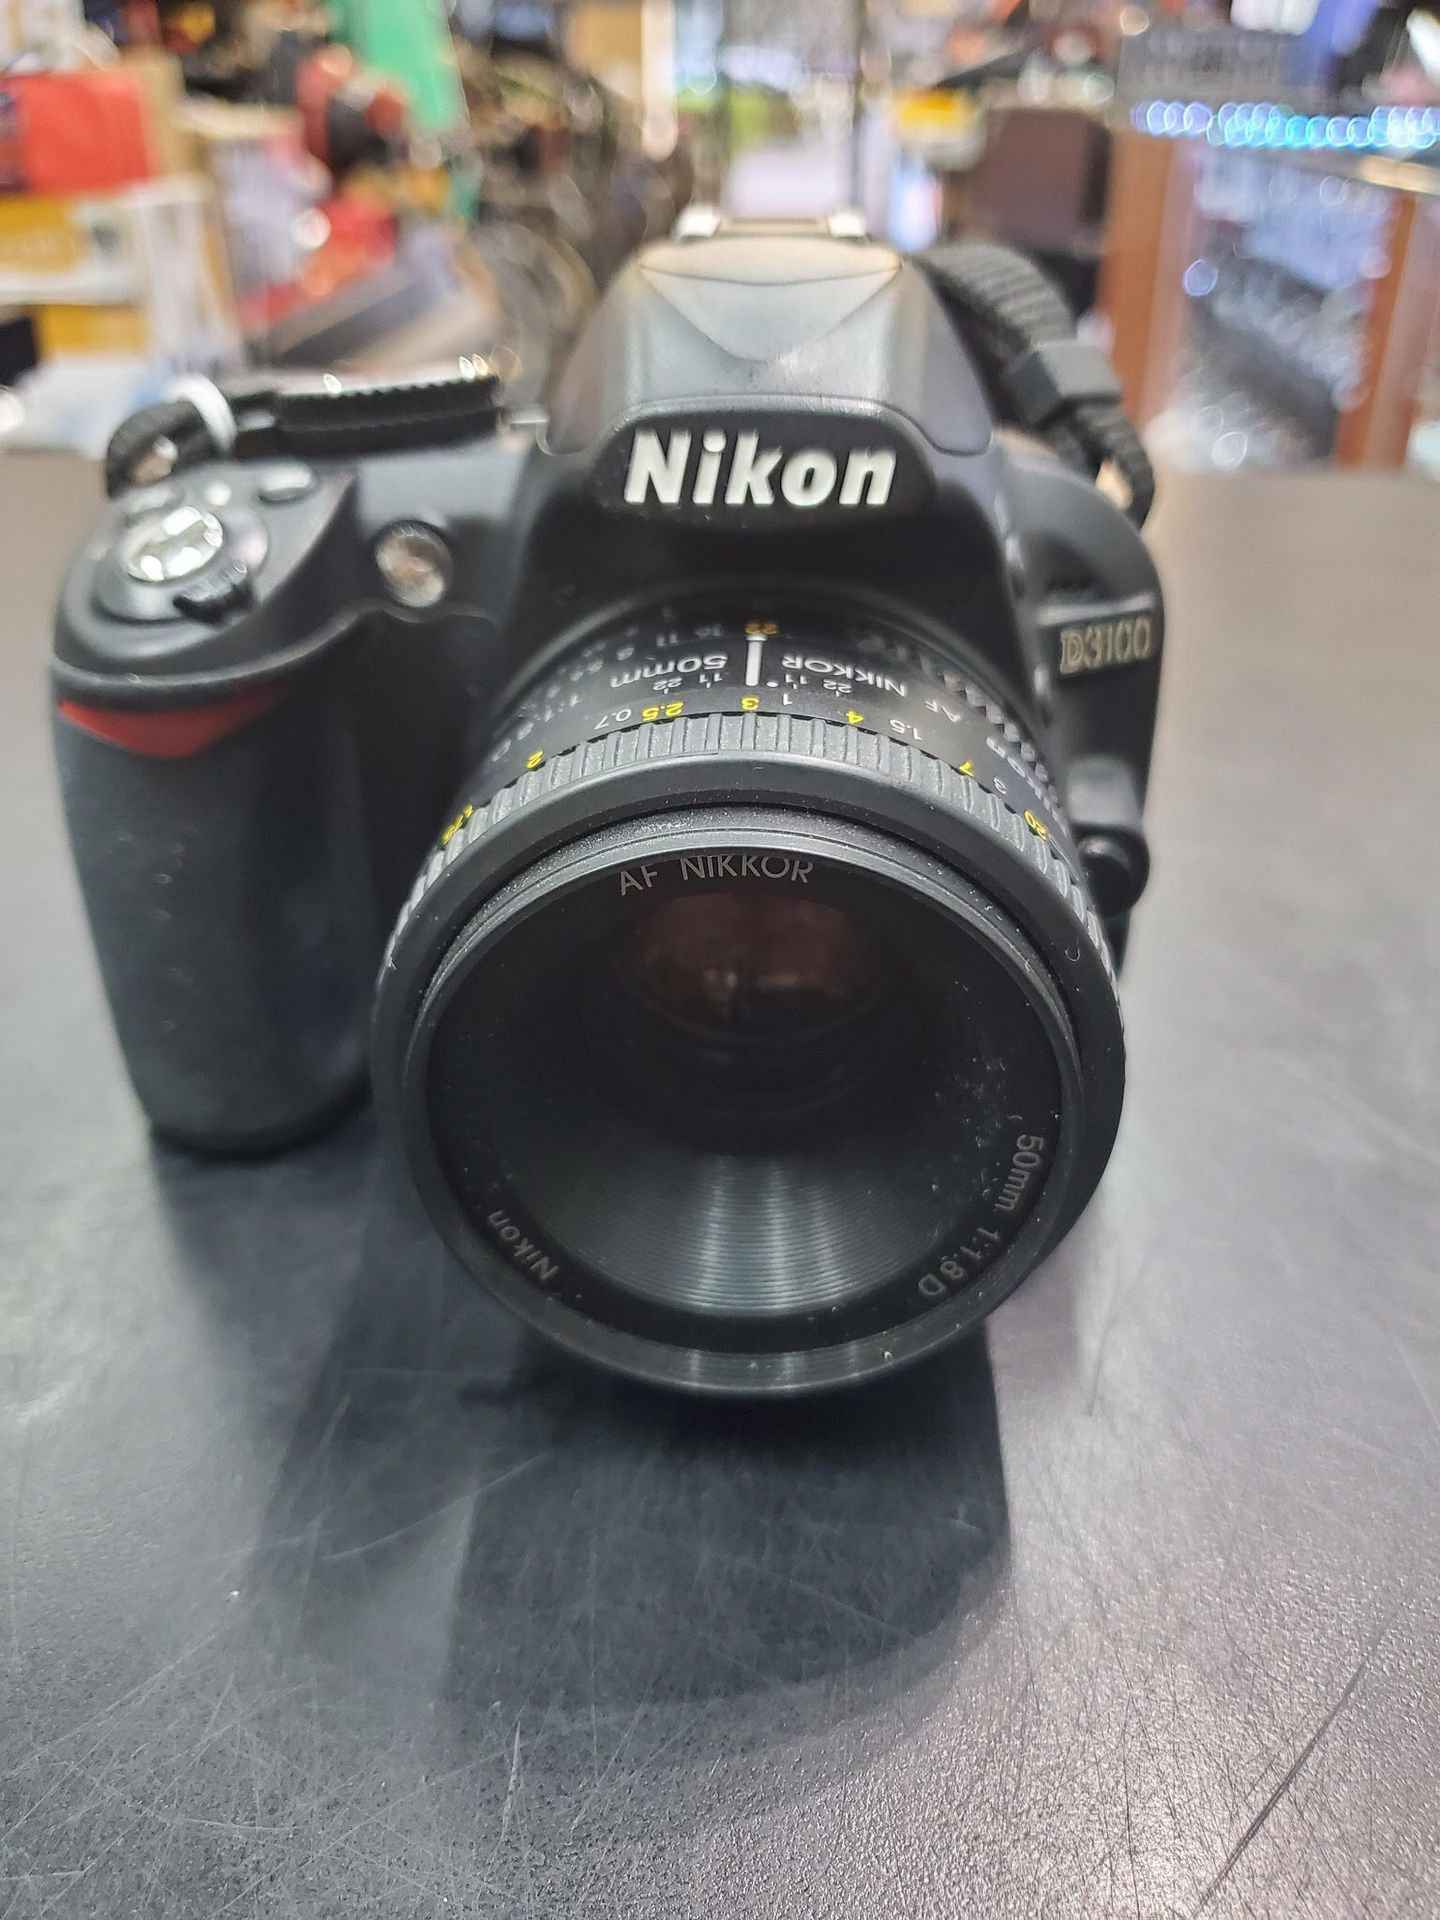 Nikon D3100 Digital Camera with 50mm 1:1.8D and Charger